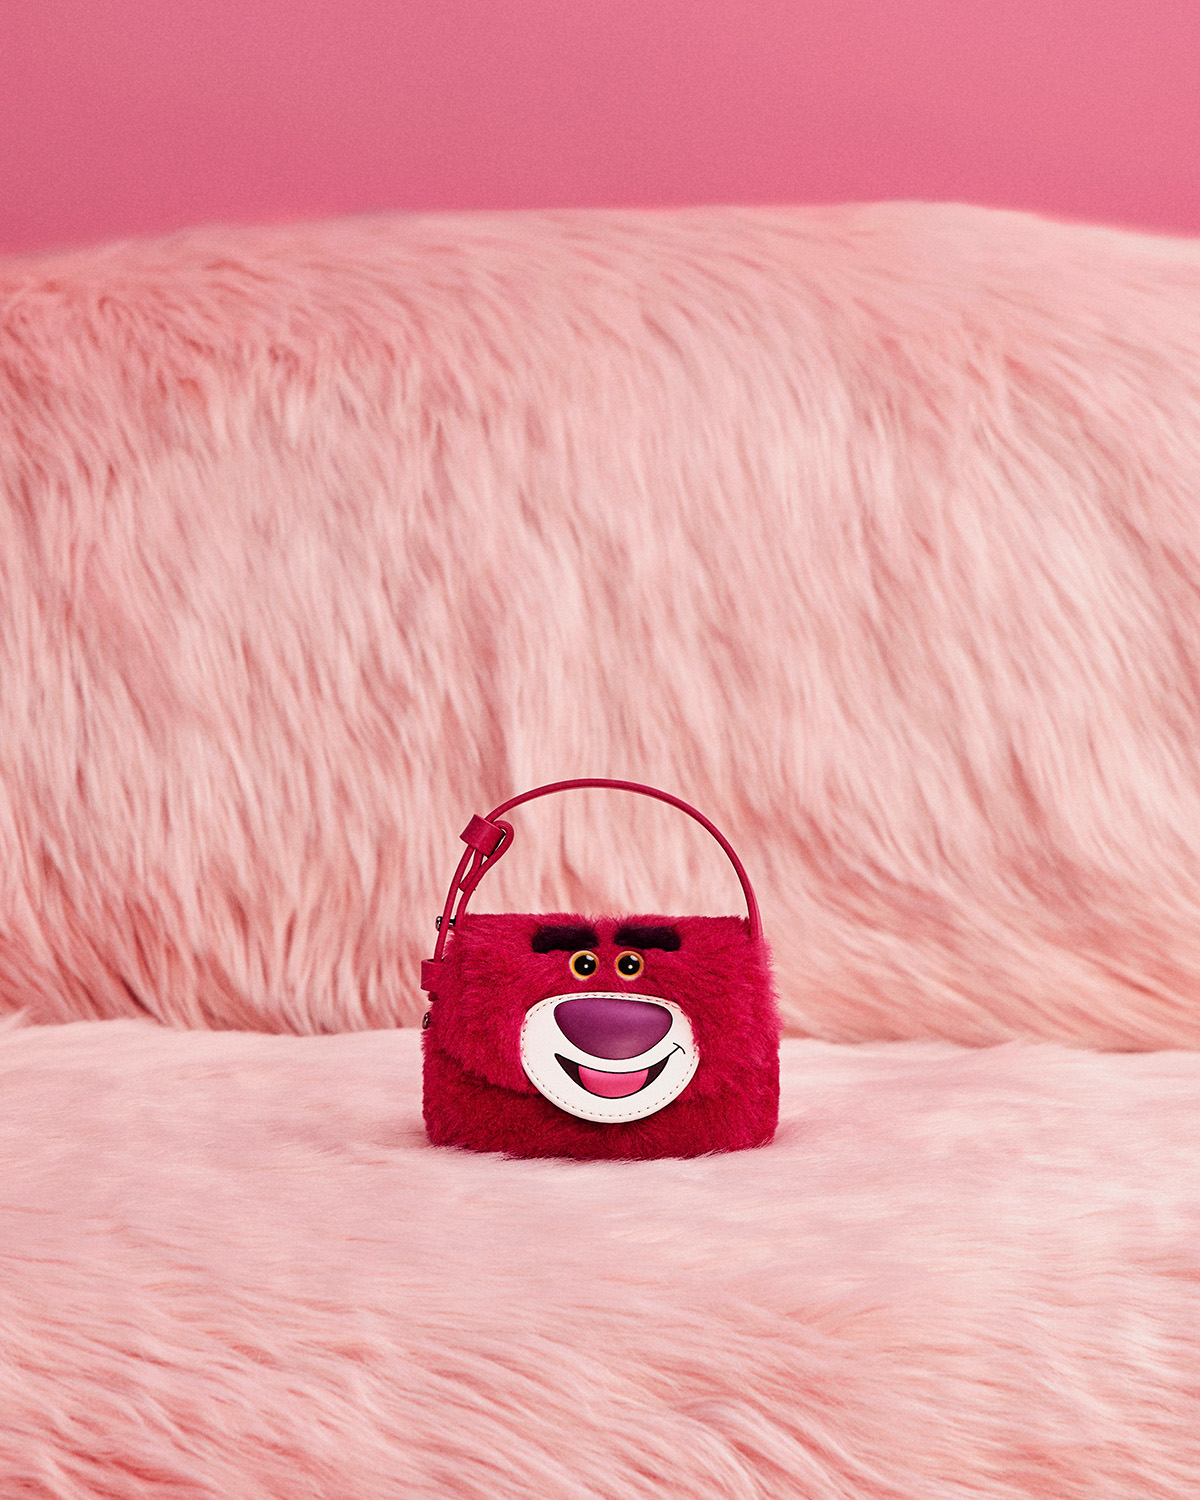 Lotso Pixar Collection, Furry Bags & Shoes